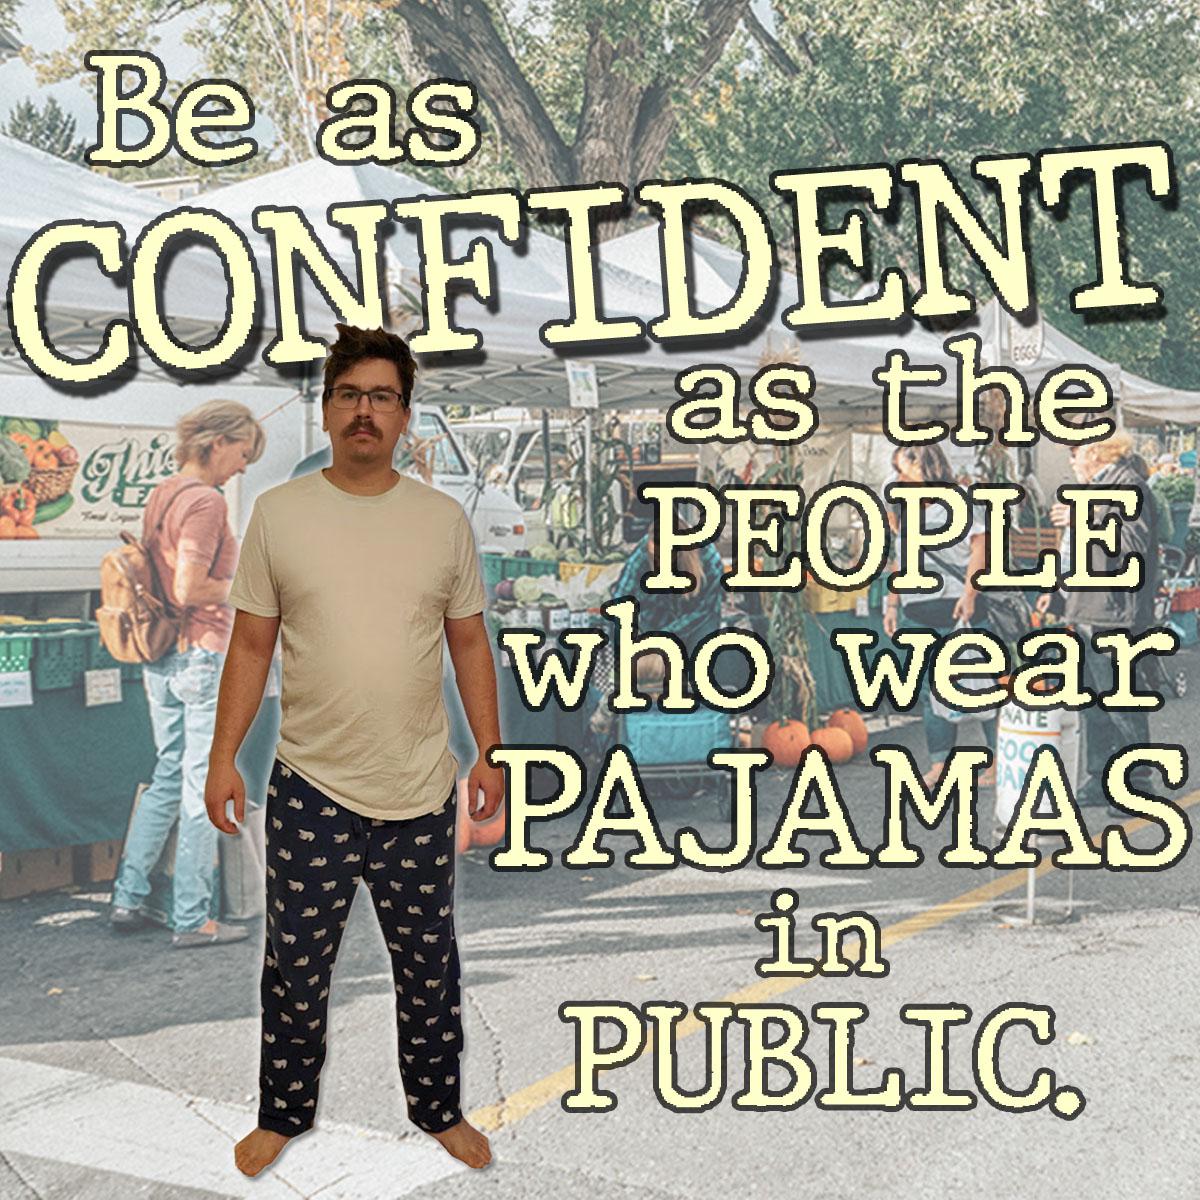 cool - Be as Confident as the This People who wear Pajamas in Public